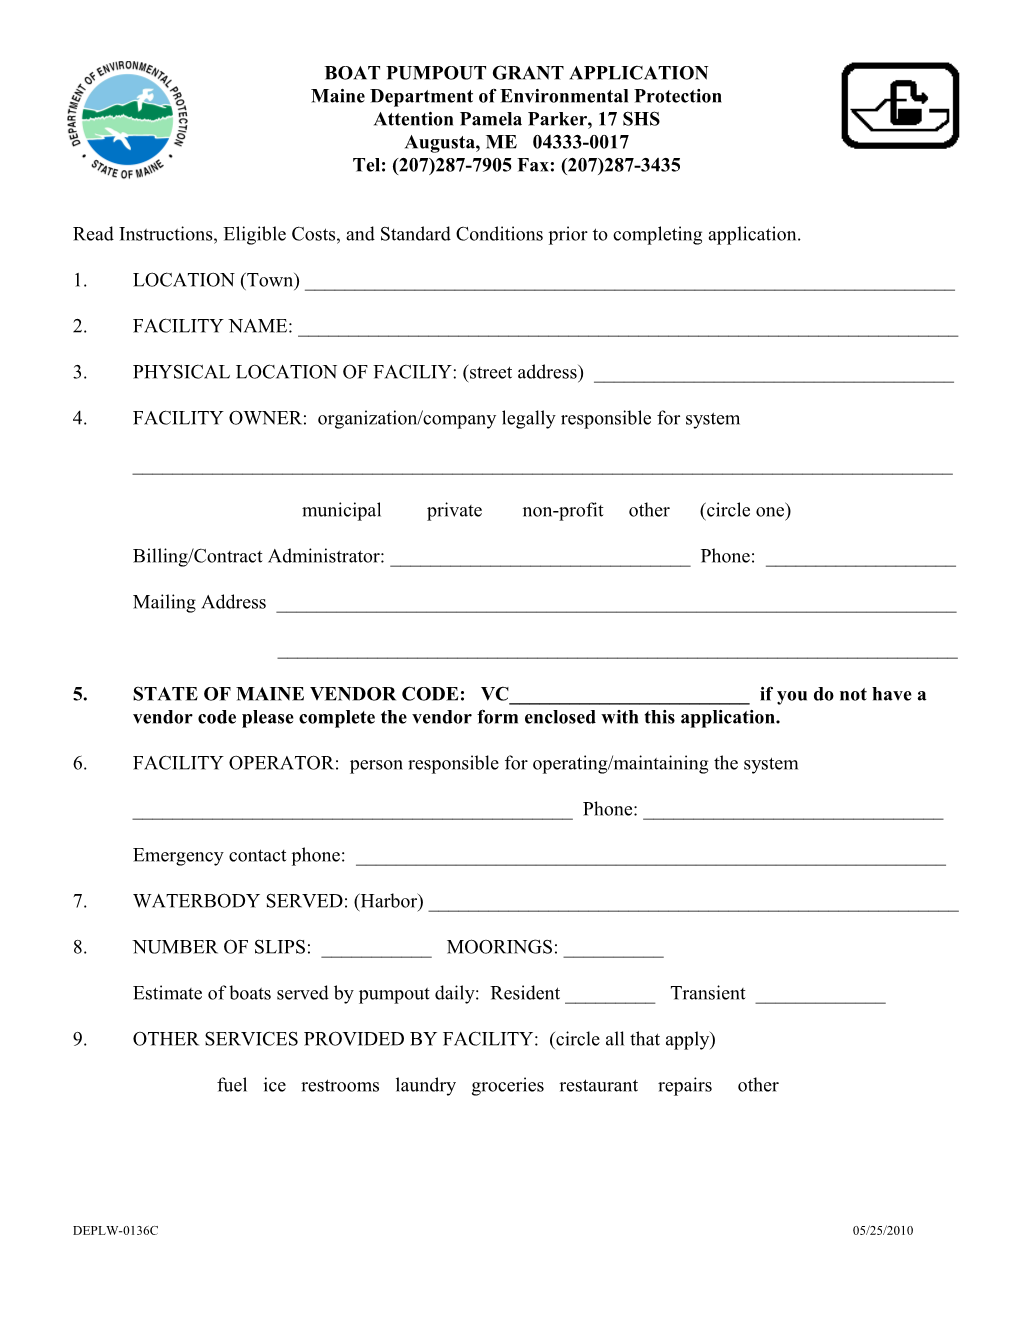 Boat Pump-Out Grant Application